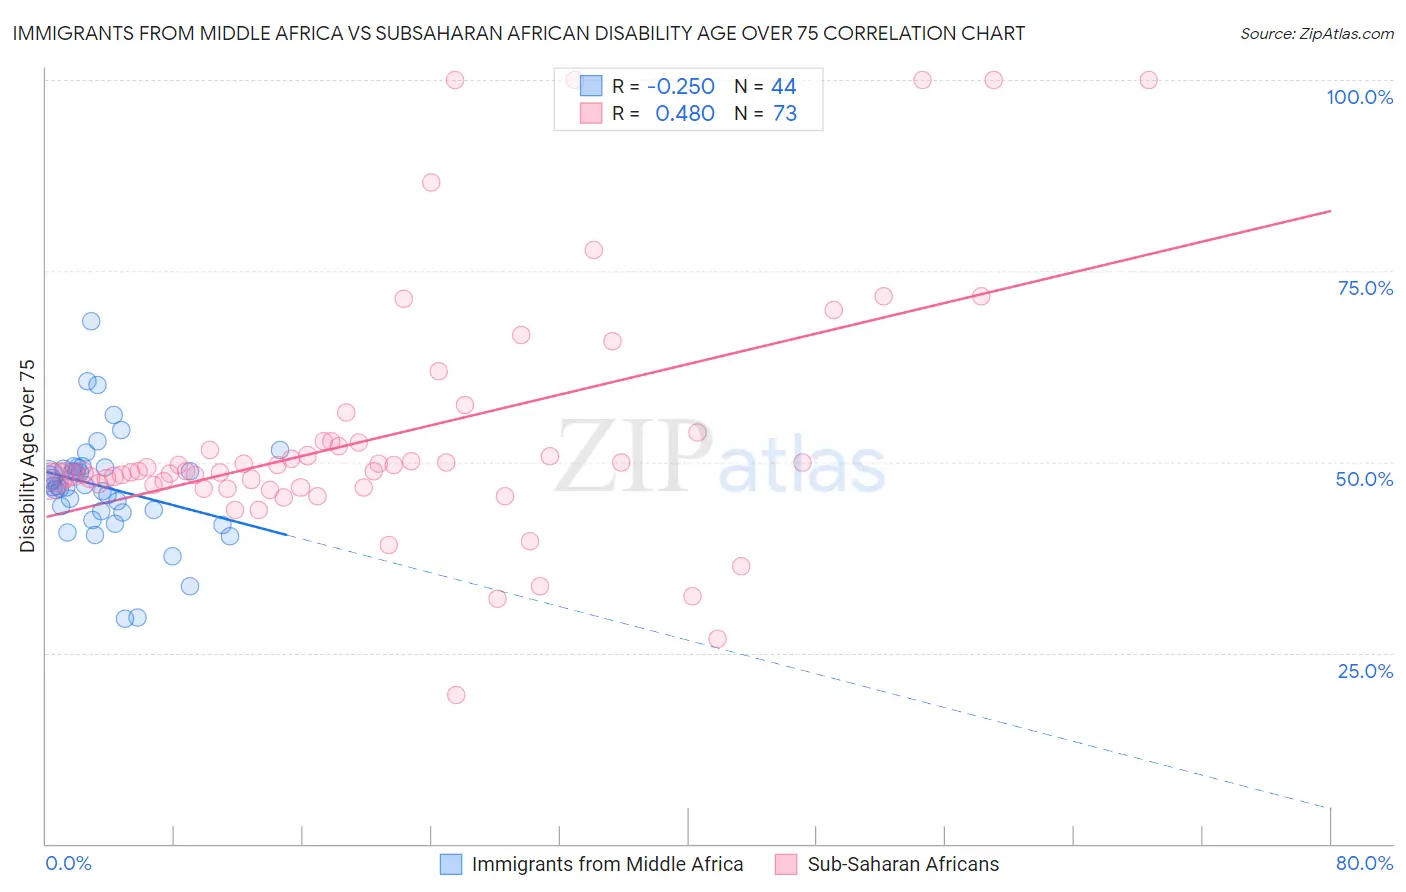 Immigrants from Middle Africa vs Subsaharan African Disability Age Over 75